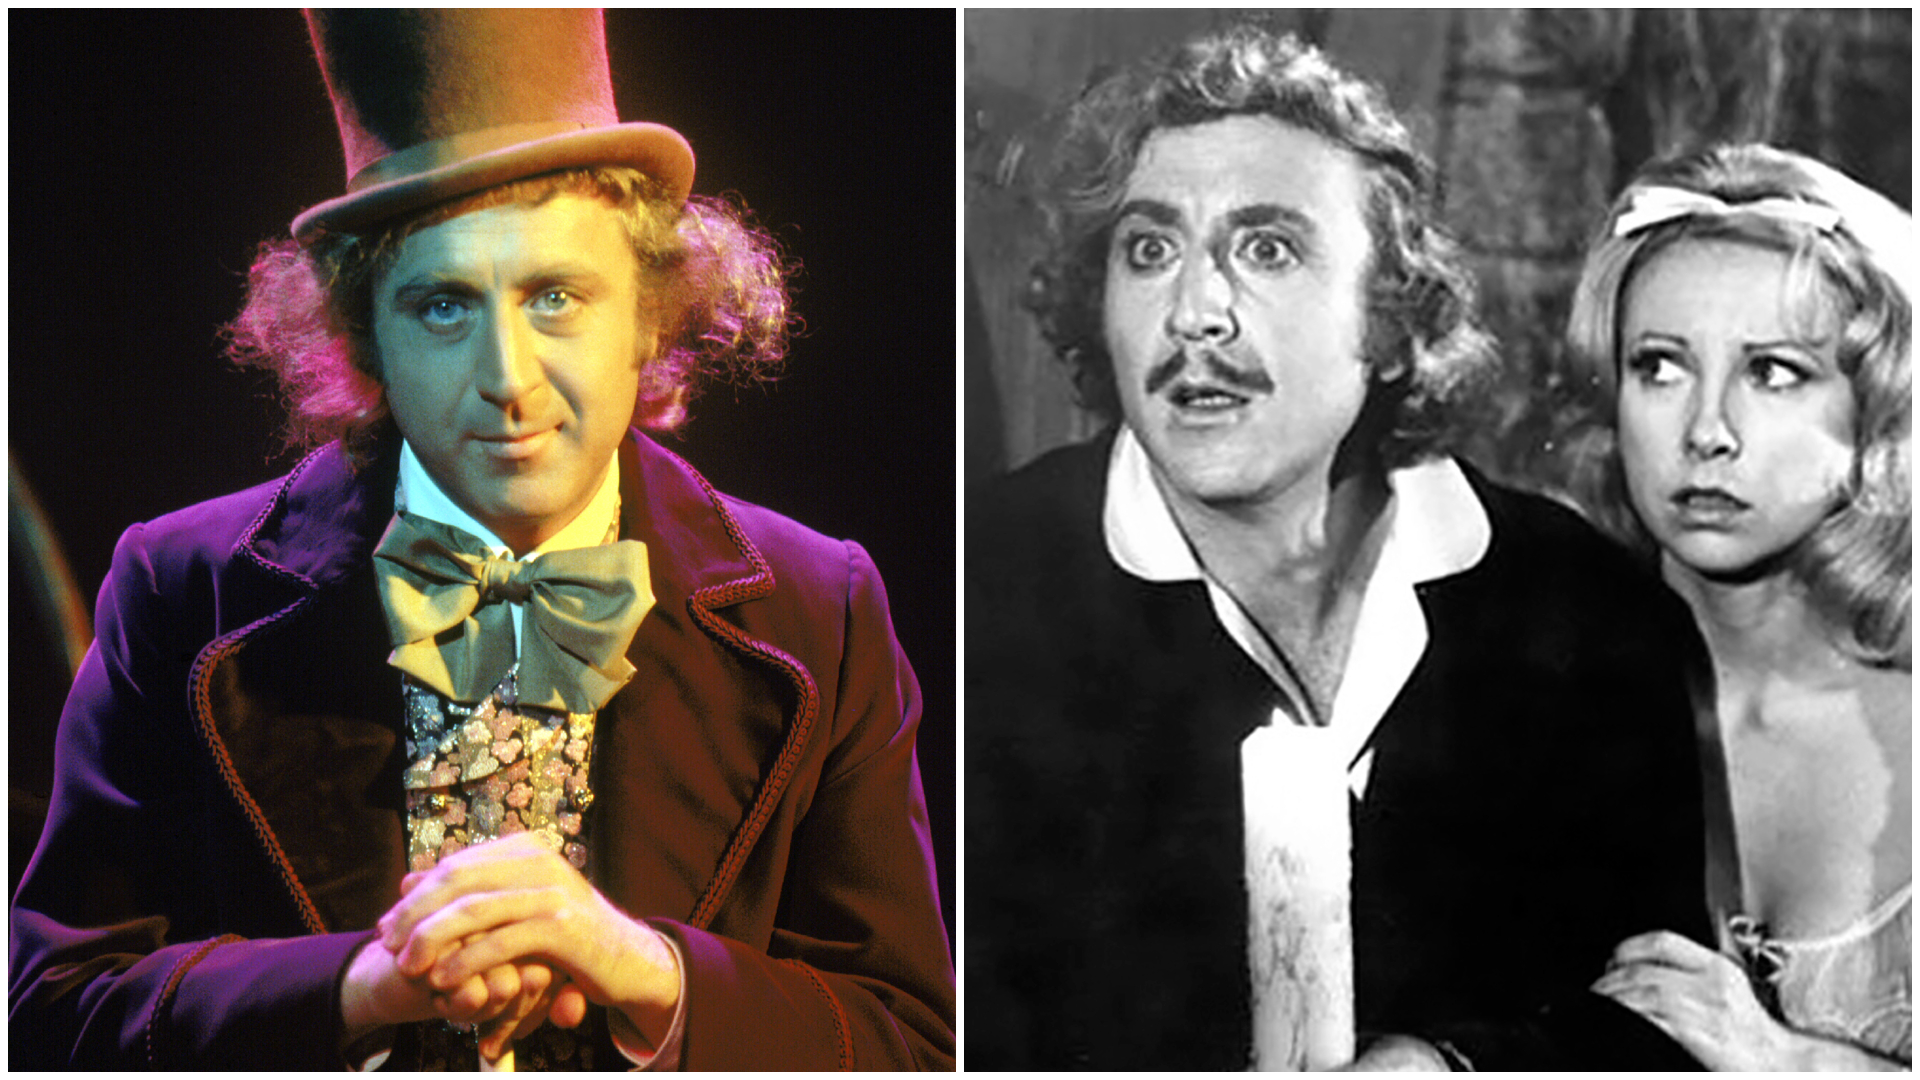 Gene Wilder dead: How the actor came up with his iconic Willy